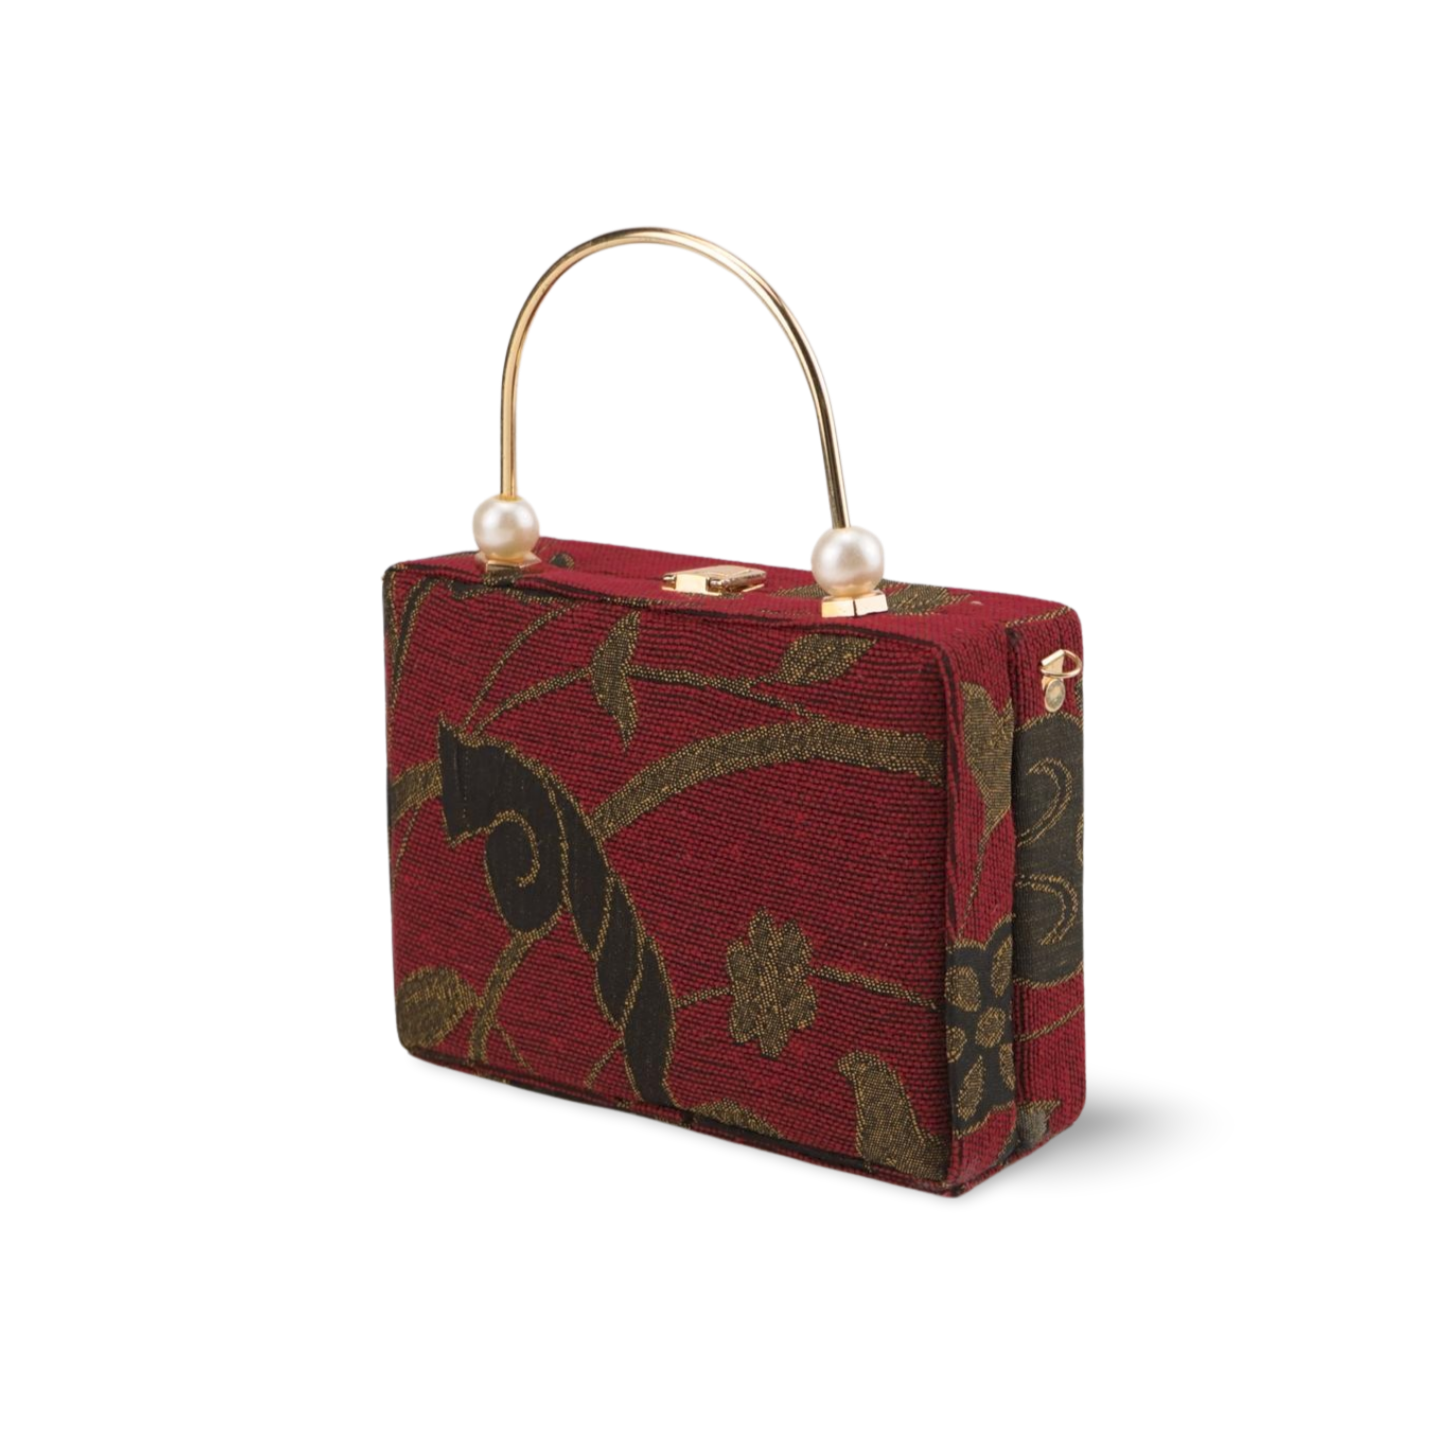 Exquisite Box Style Clutch Purse with Intricate Pattern and Gold Chain